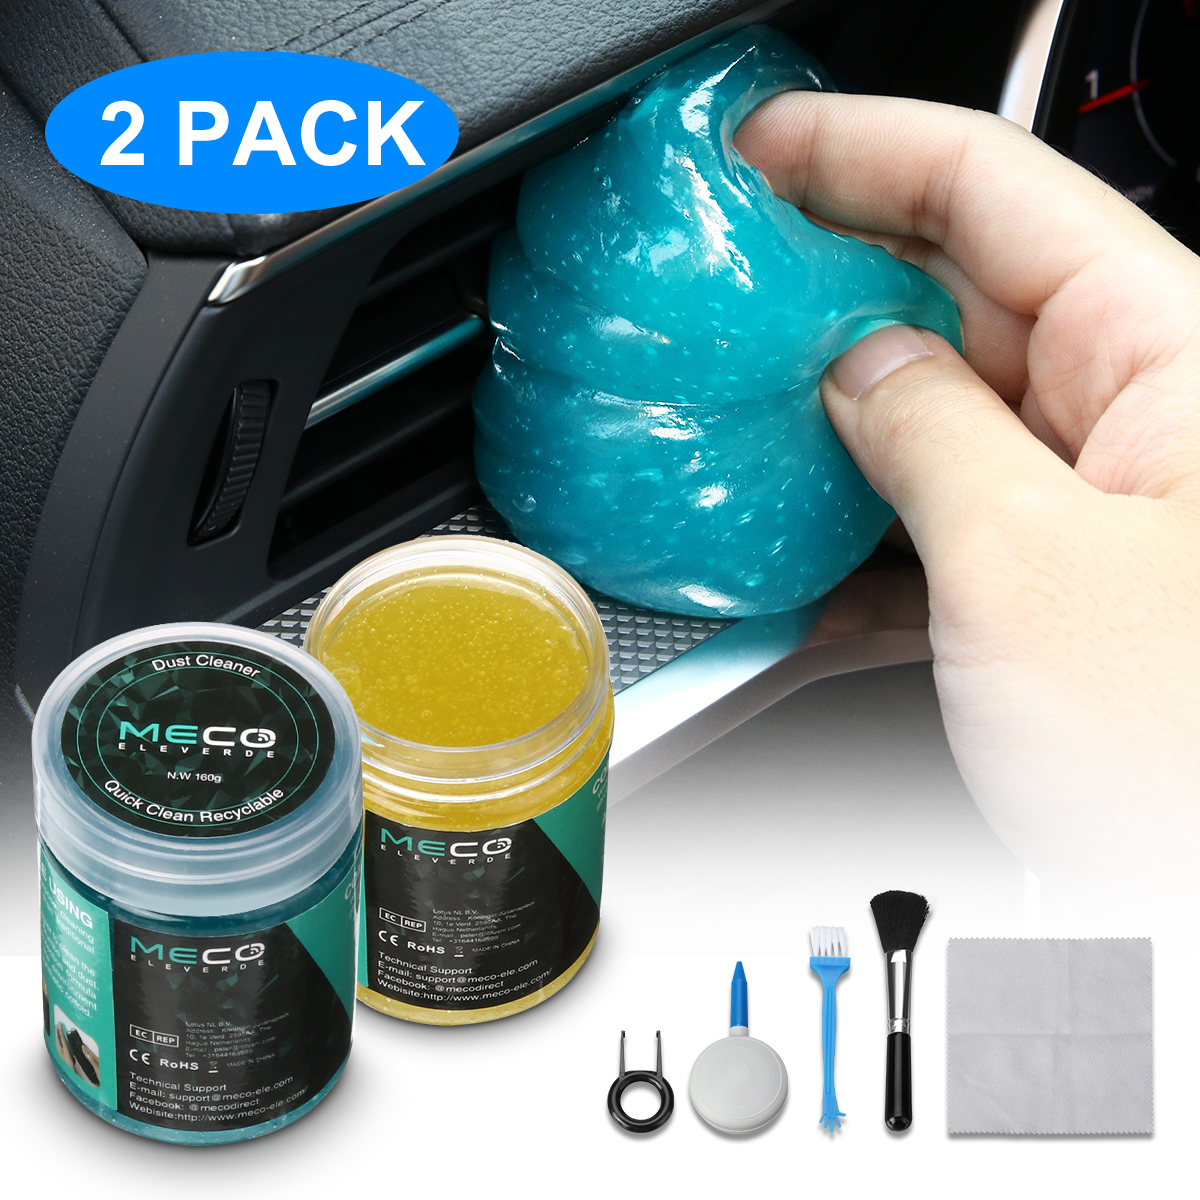 MECO-Cleaning-Gel-Universal-Dust-Cleaner-Gel-Dust-Remover-Keyboard-Cleaning-Tools-for-Keyboards-Car--1795370-1